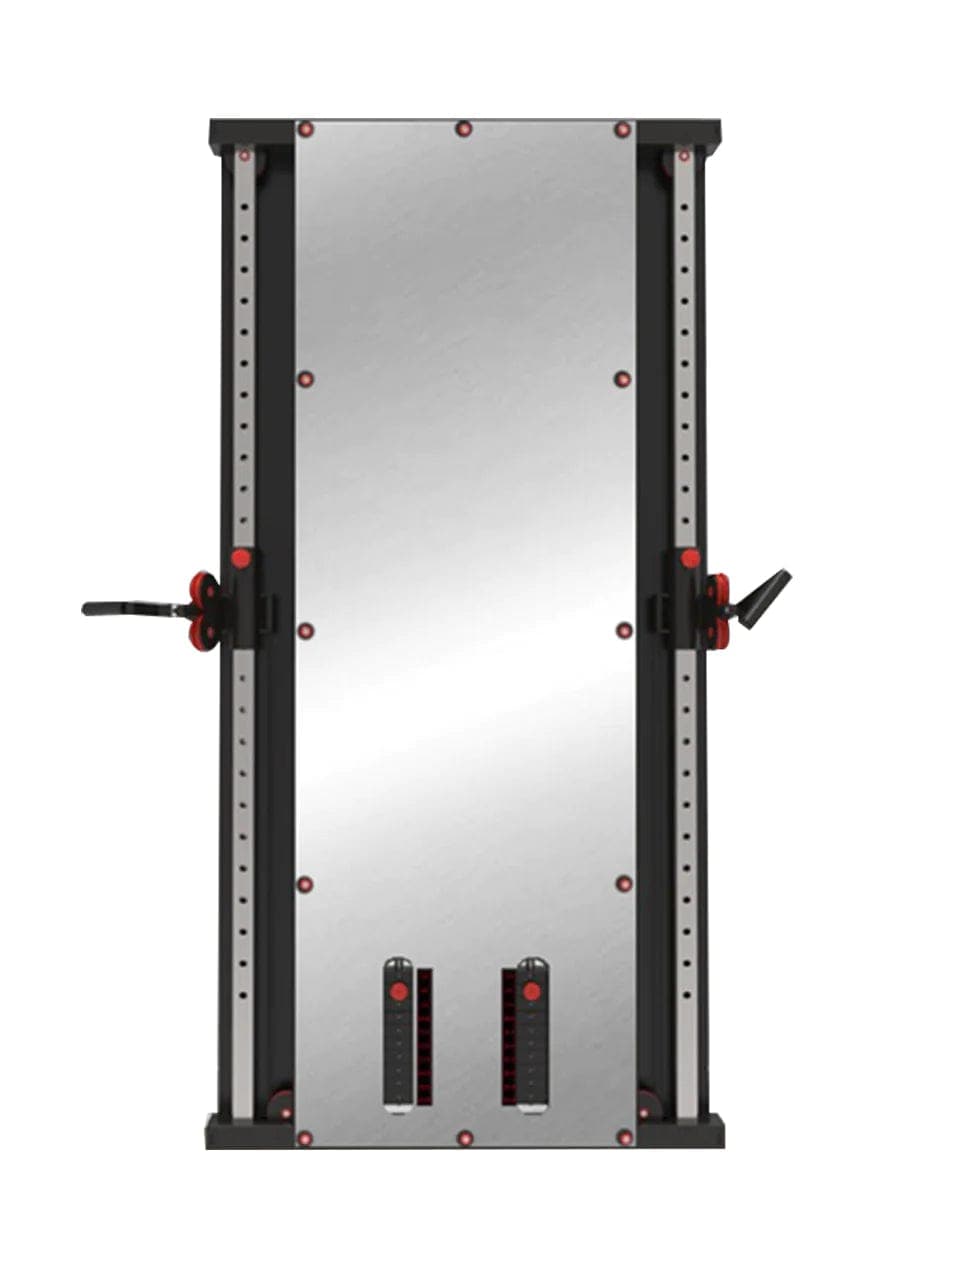 Combo Deal | 1441 Fitness Wall Mounted Mirror Functional Trainer - 41FGT980 + Adjustable Bench A8007 - Athletix.ae